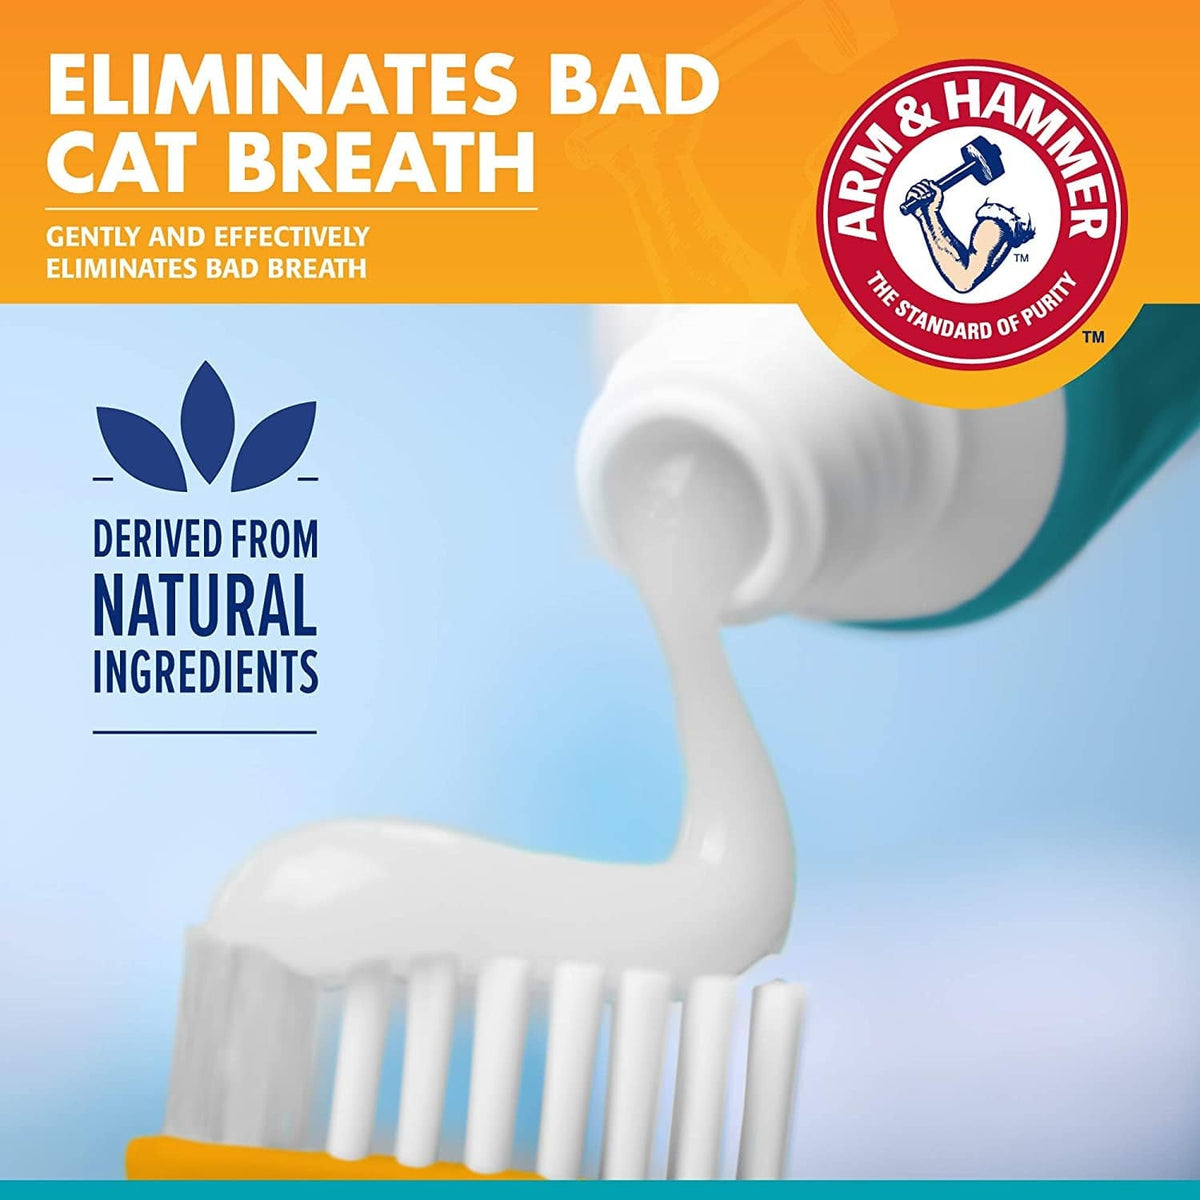 Arm & Hammer for Pets Dental Kit for Cats | Eliminates Bad Breath | 3 Piece Set Includes Cat Toothpaste, Cat Toothbrush & Cat Fingerbrush in Tasty Tuna Flavor,2.5 Ounces